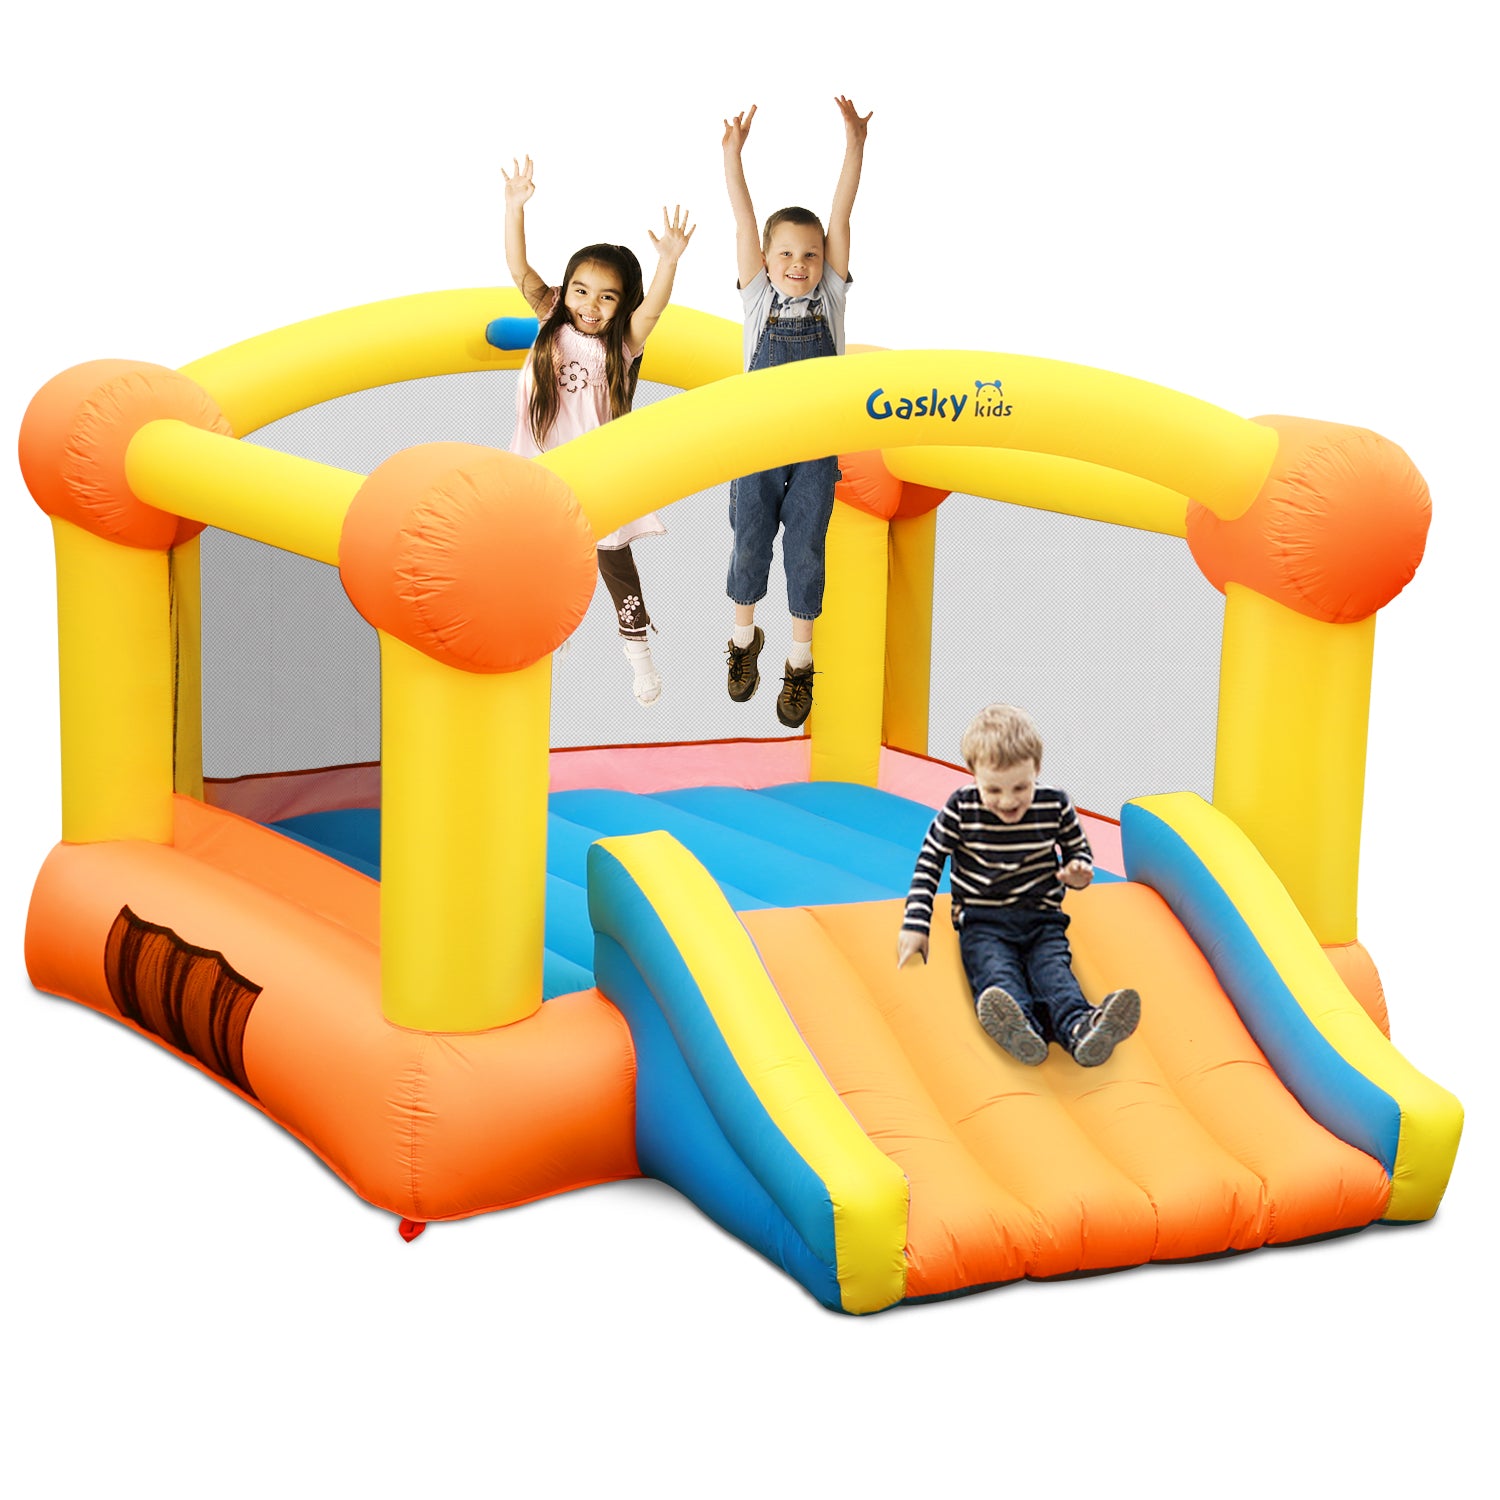 Load image into Gallery viewer, Bounce House Bouncy House Inflatable Bounce House Bouncing House 12x9x5.7FT Large Bouncing Area W Slide,Blower,Basketball Hoop, Repair Patches, Storage Bag for Ages 3-8 Years Kids Outdoor
